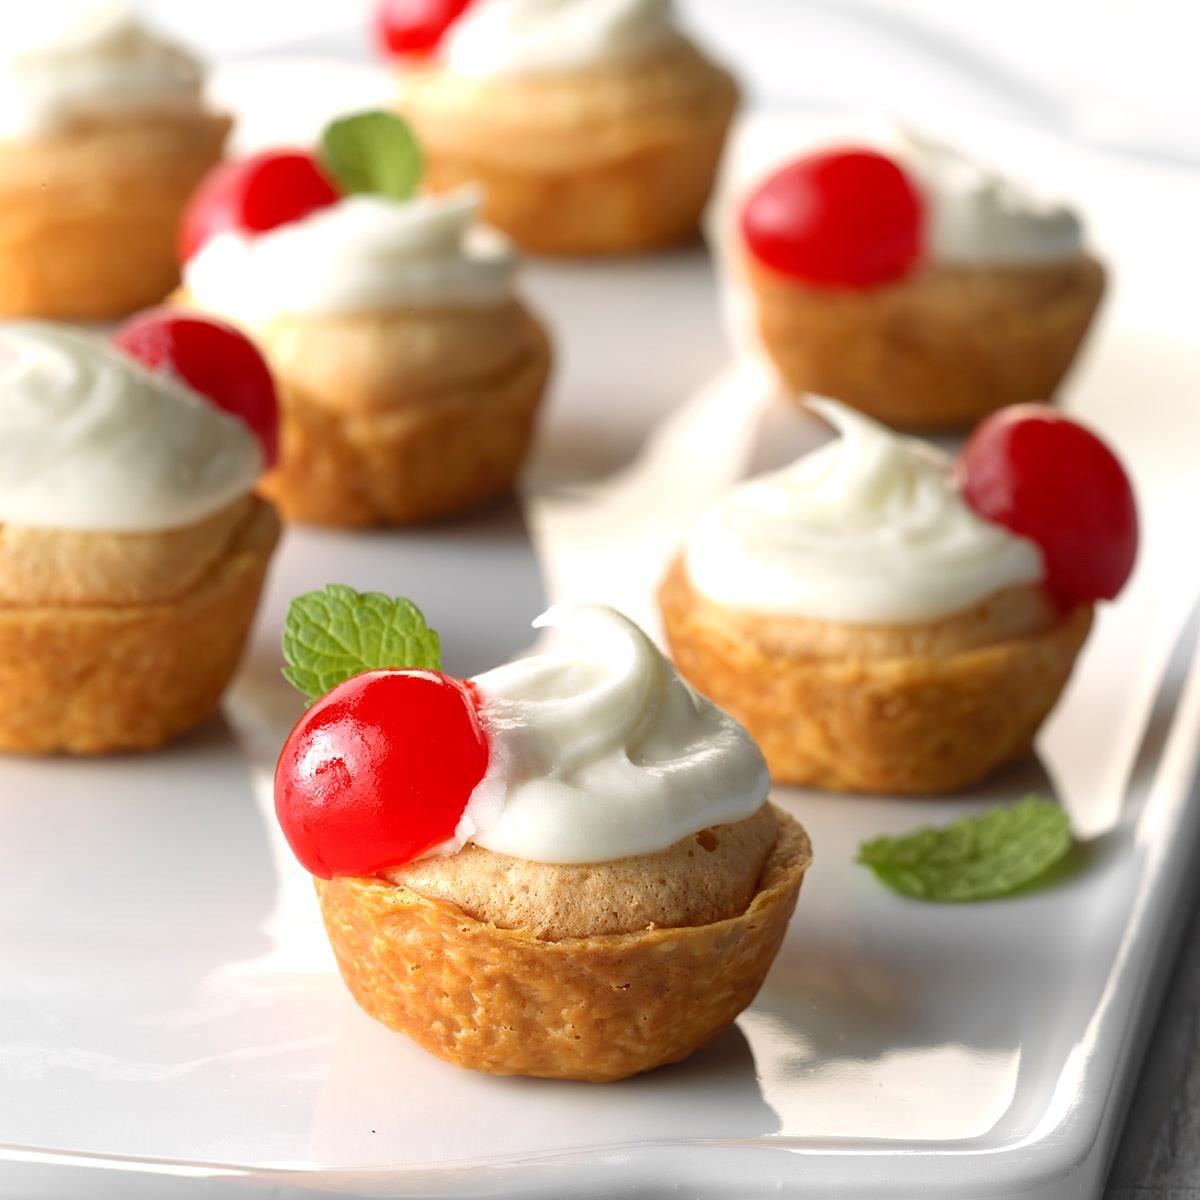 Bakery Trends: Mini Pastries are a Big Thing